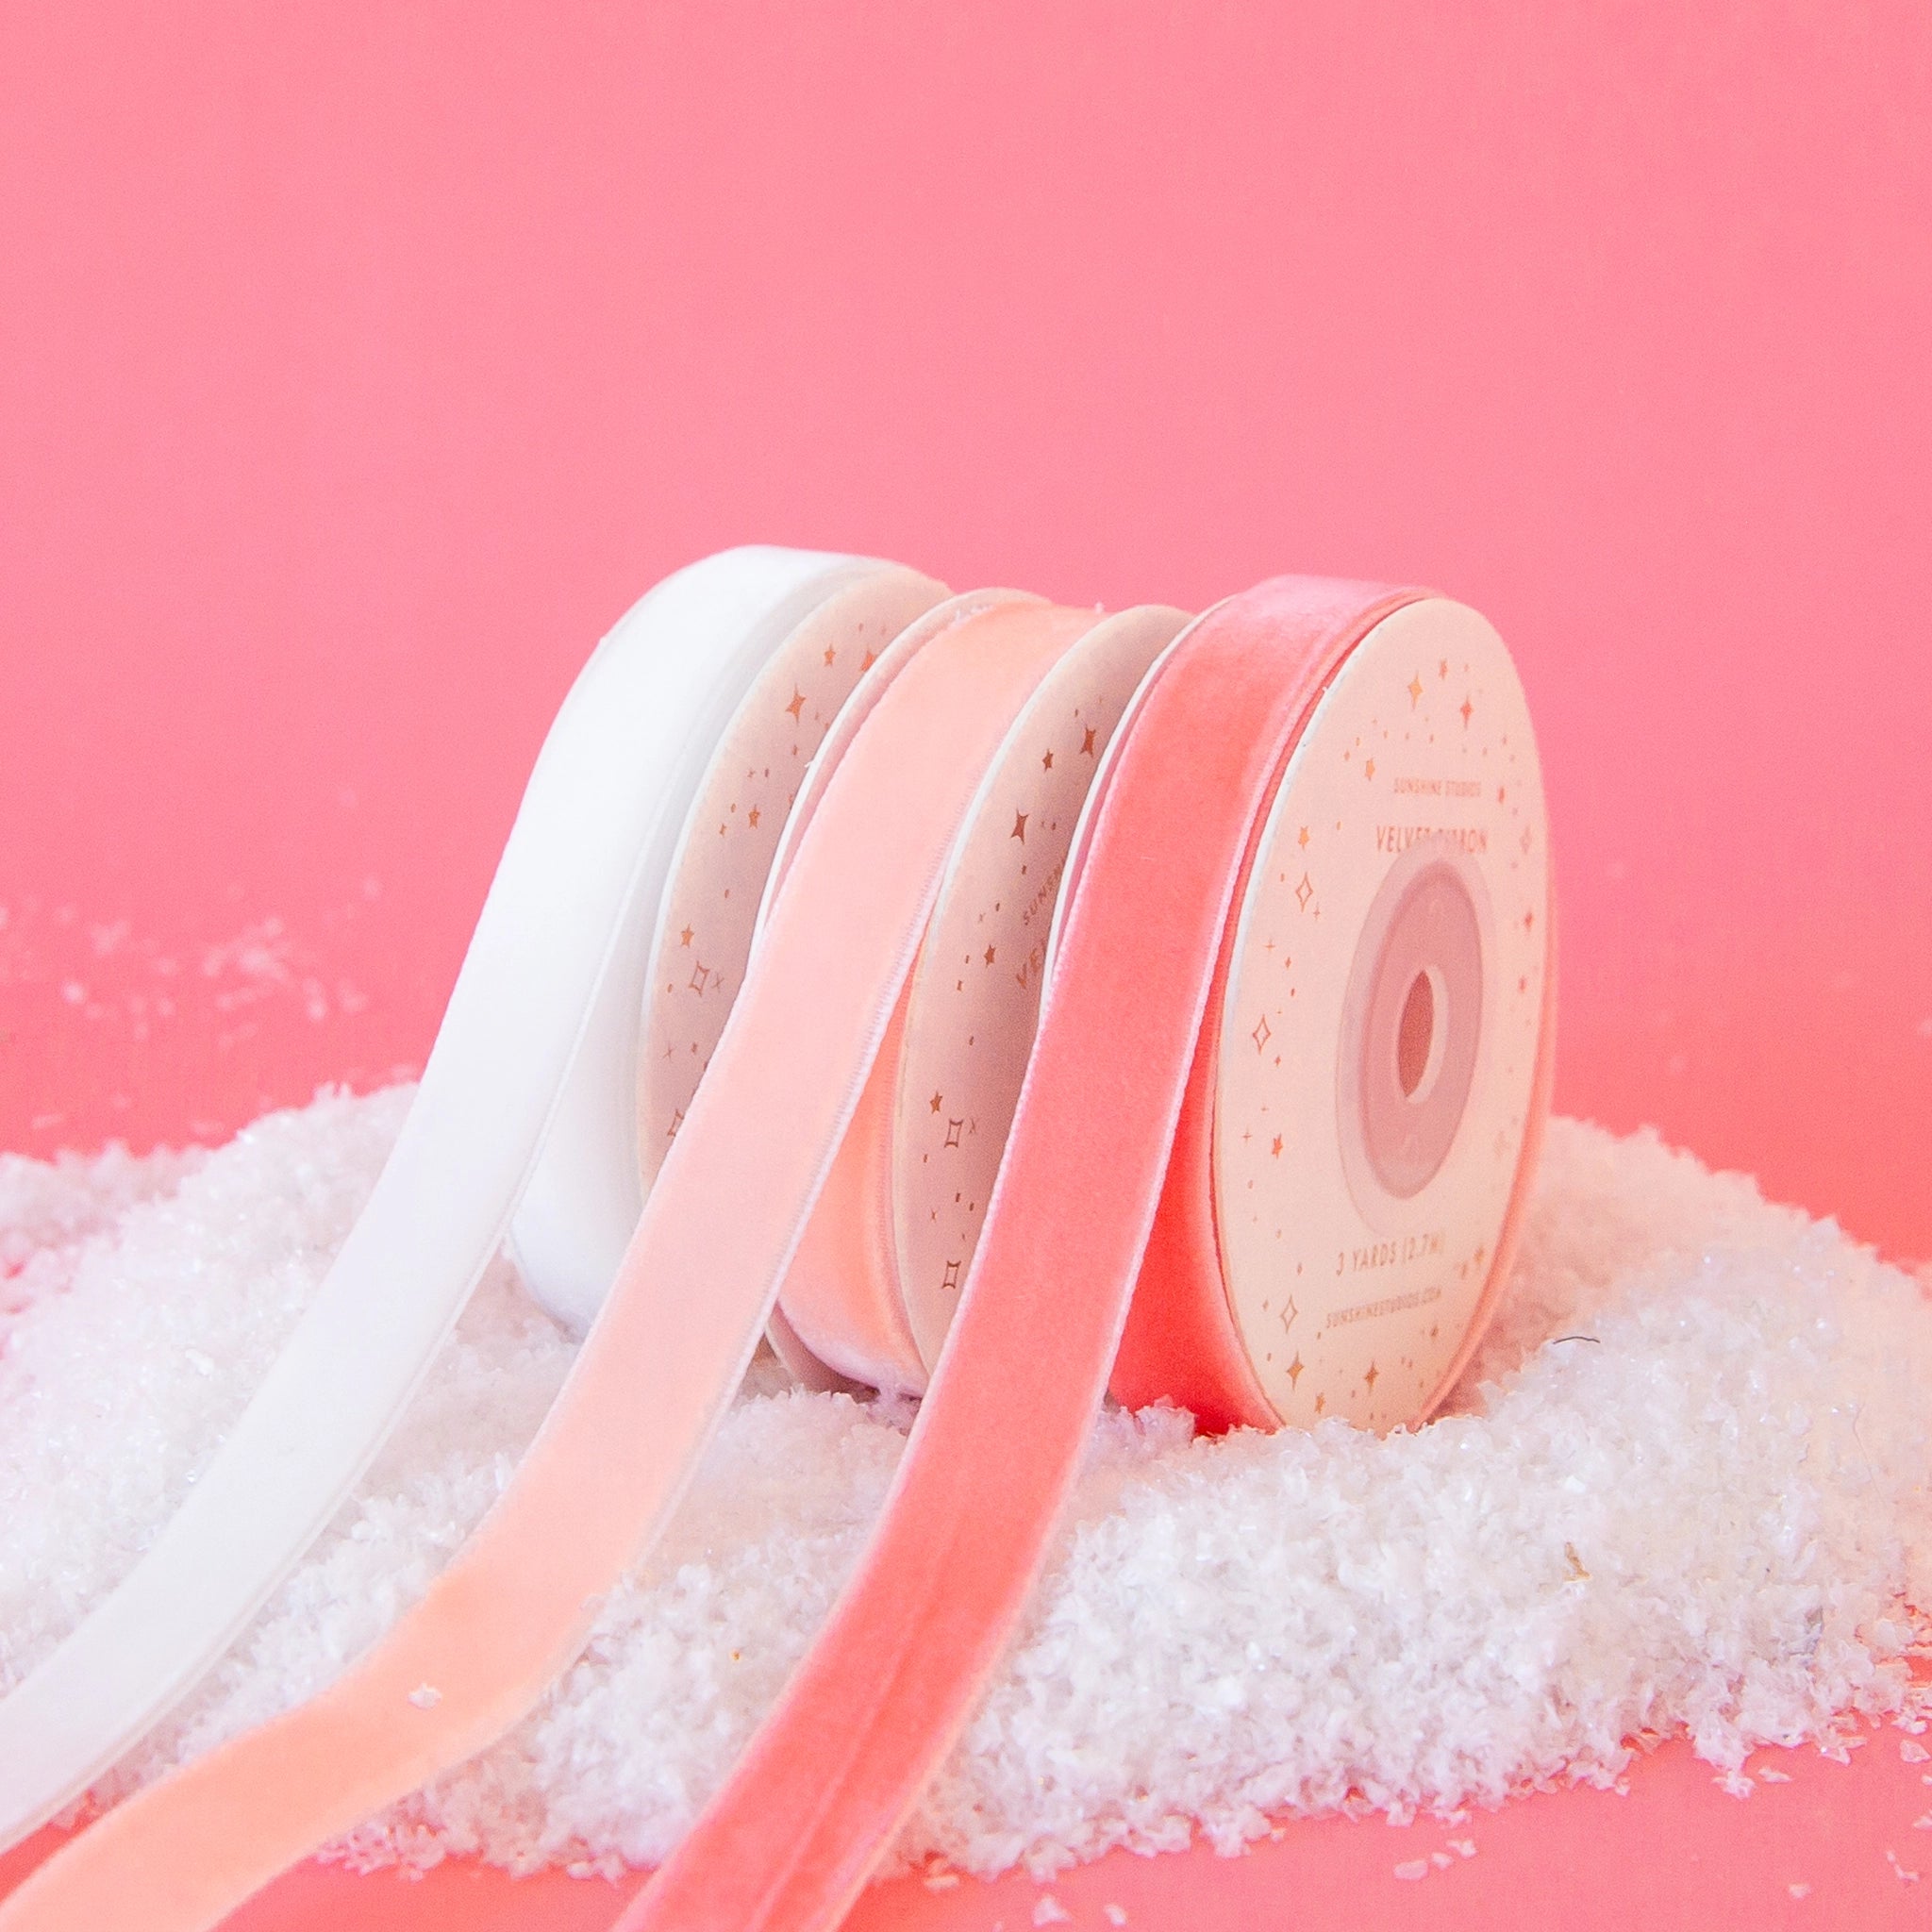 On a pink background is three spools of velvet ribbon in three shades. From left to right the colors are white, light pink and peach.